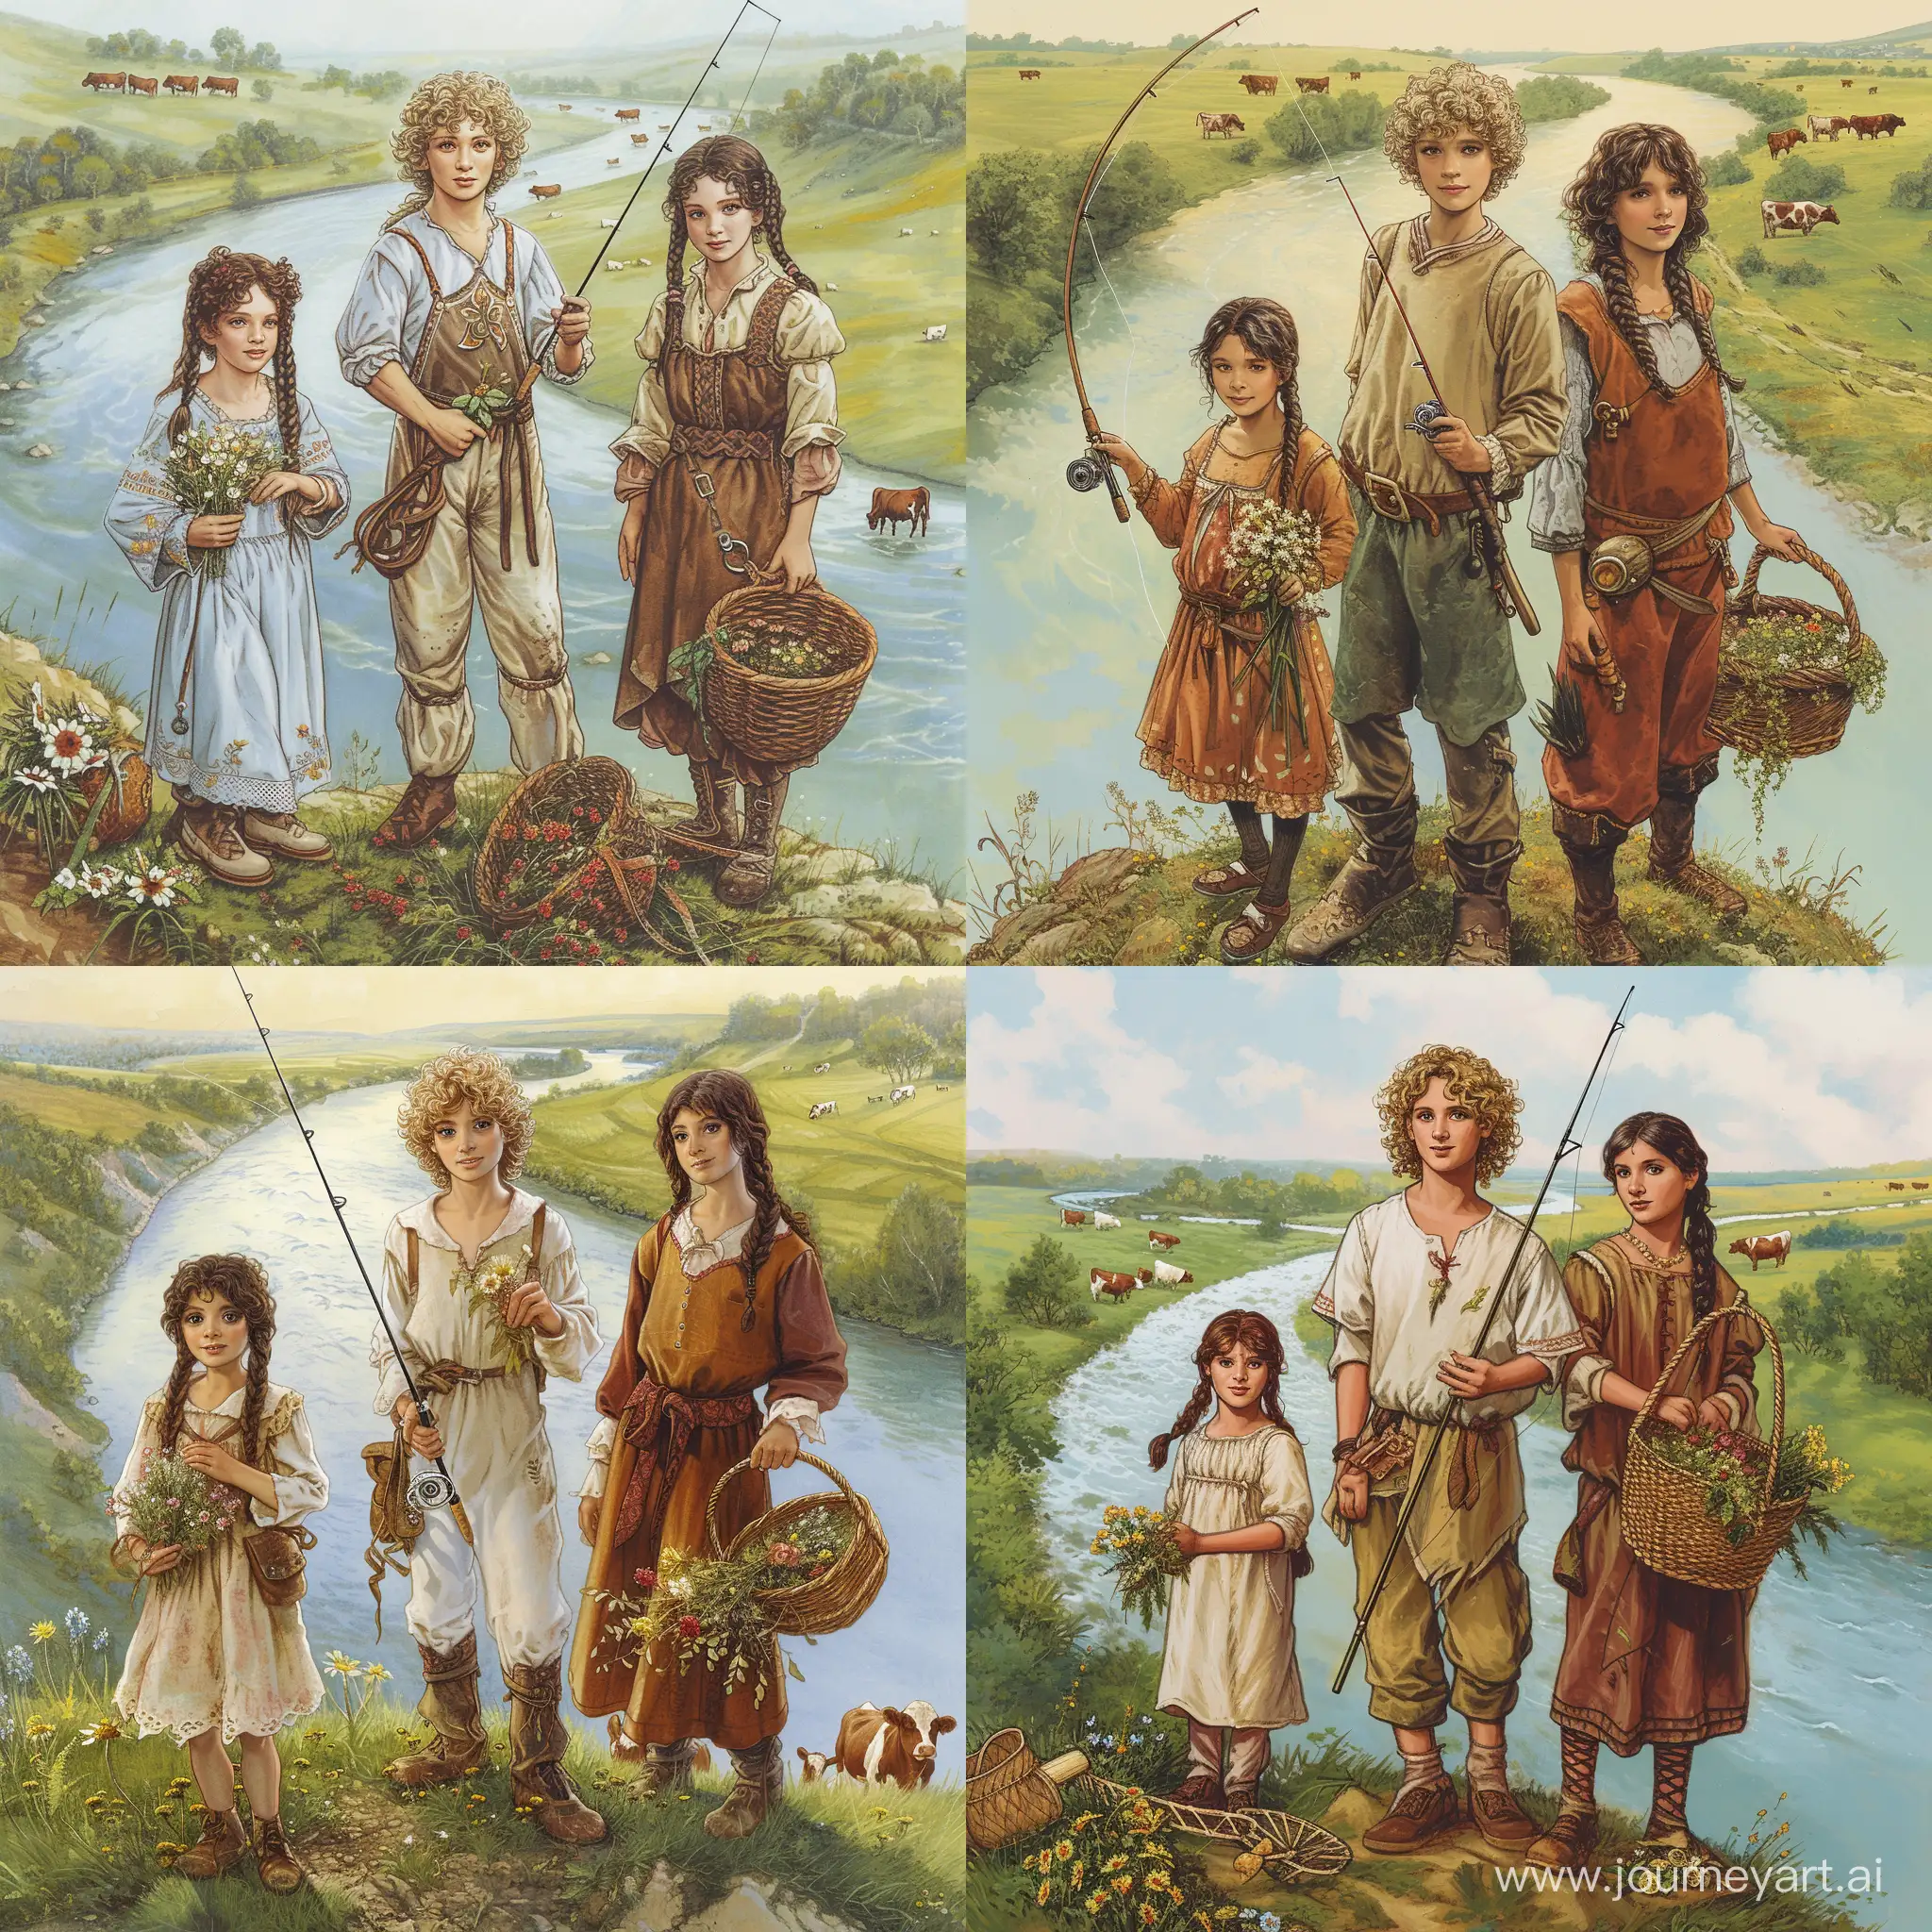 book illustration, three people, (a thirteen-year-old boy with light curly hair, holding a fishing rod in his left hand), (a five-year-old girl with dark hair, braided, stands to the left of the boy, holds wildflowers in her left hand), (a sixteen-year-old girl with dark hair, braided, stands to the right of the boy, holding a wicker basket in his right hand), dressed in peasant clothes, standing on a hill, against the background of a winding river, sunny day, summer, noon, cows grazing in a meadow across the river